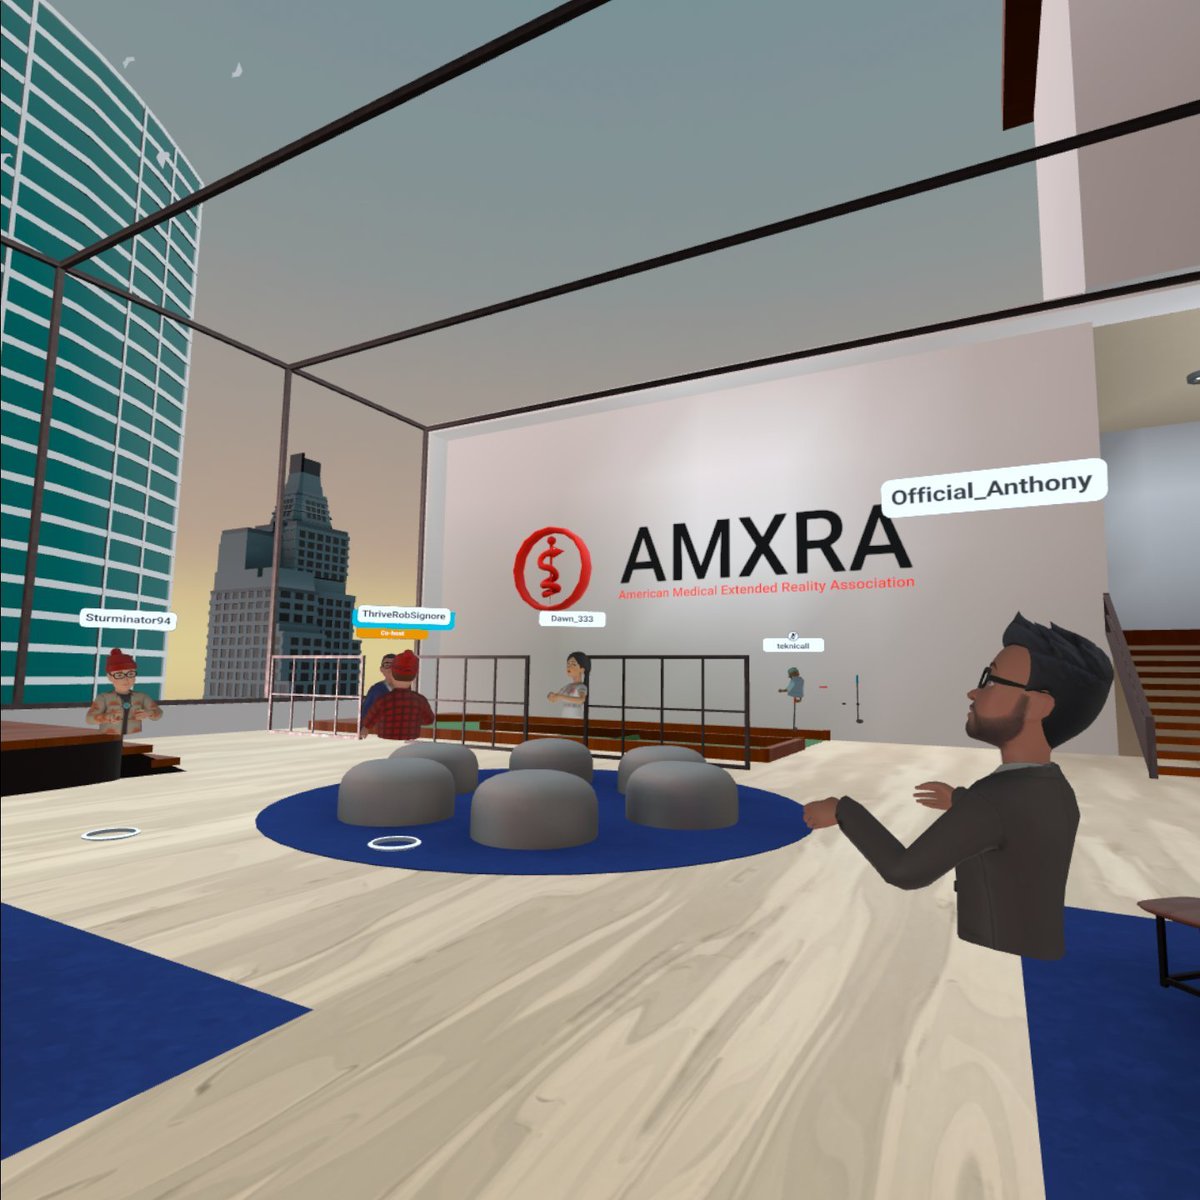 AMXRA has a world in @MetaHorizon! We are the medical society for extended reality. Interested in joining? amxra.org Meet and greets every Tuesday 7-8PM EST in the AMXRA space of Horizon Worlds. #medical #medicine #vr #horizonworlds